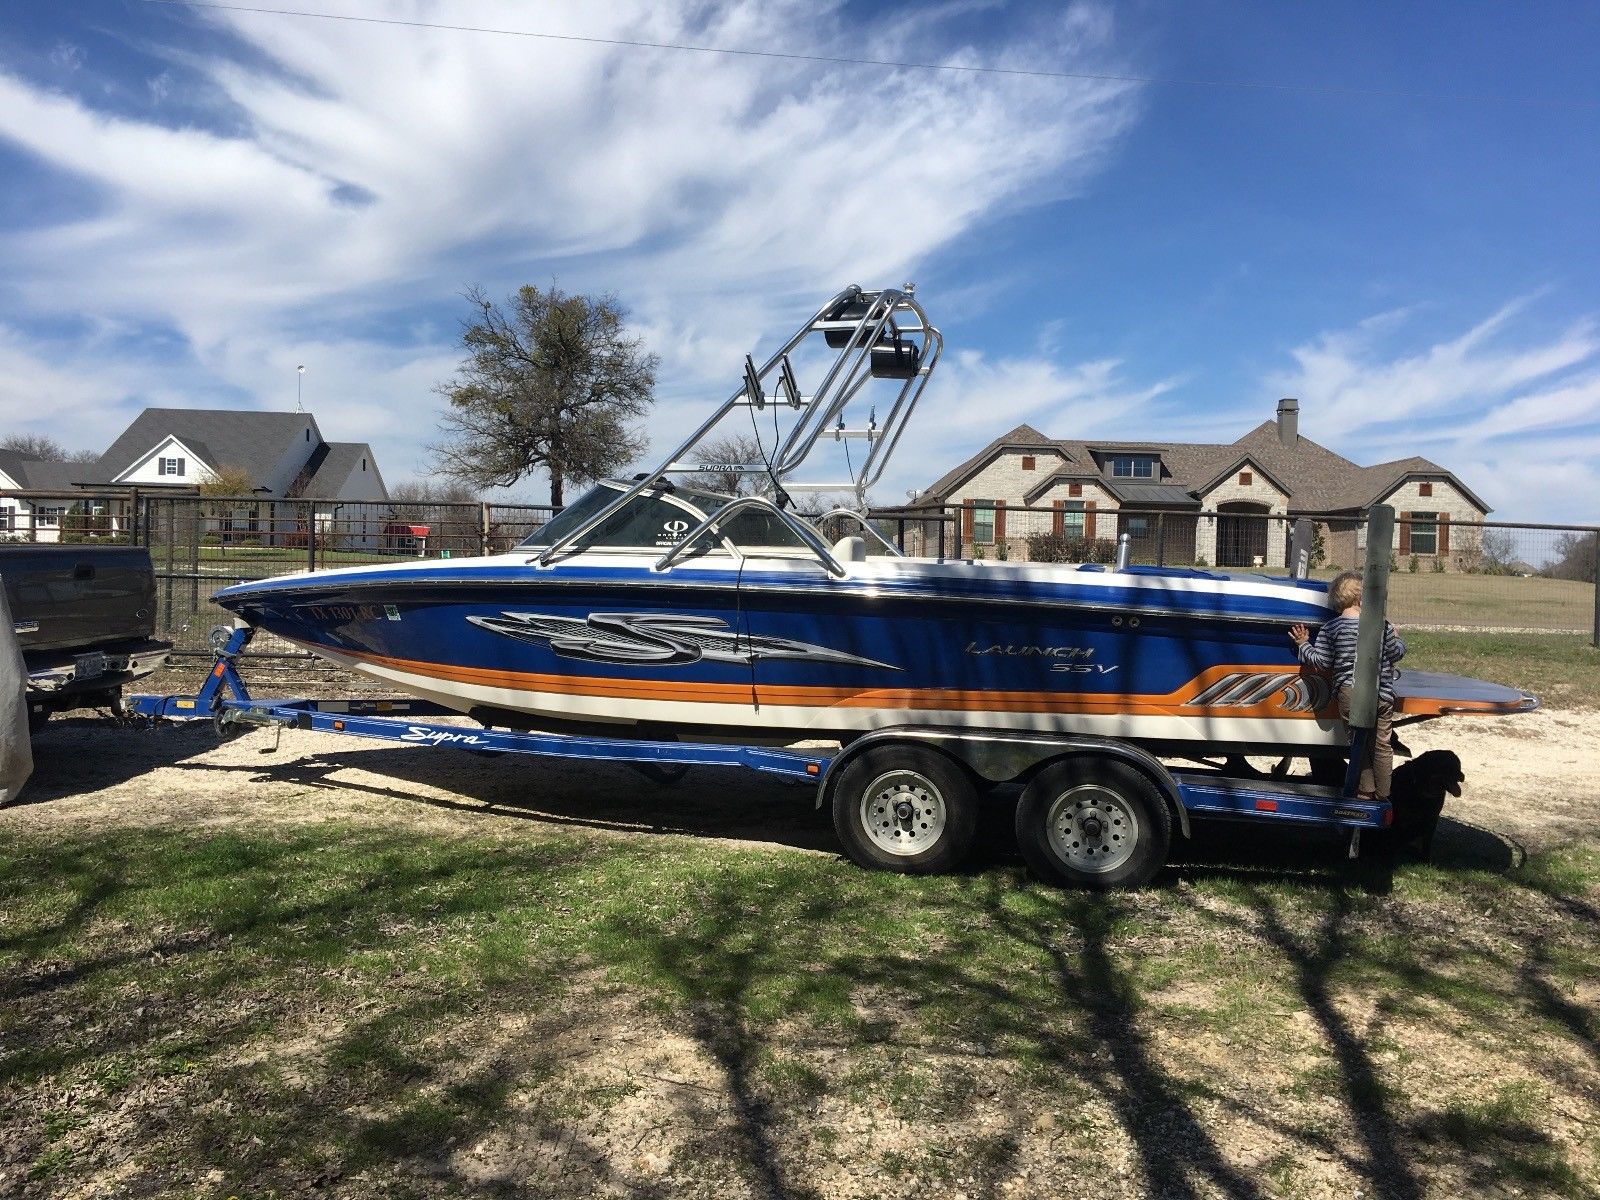 Supra 2004 for sale for $21,000 - Boats-from-USA.com